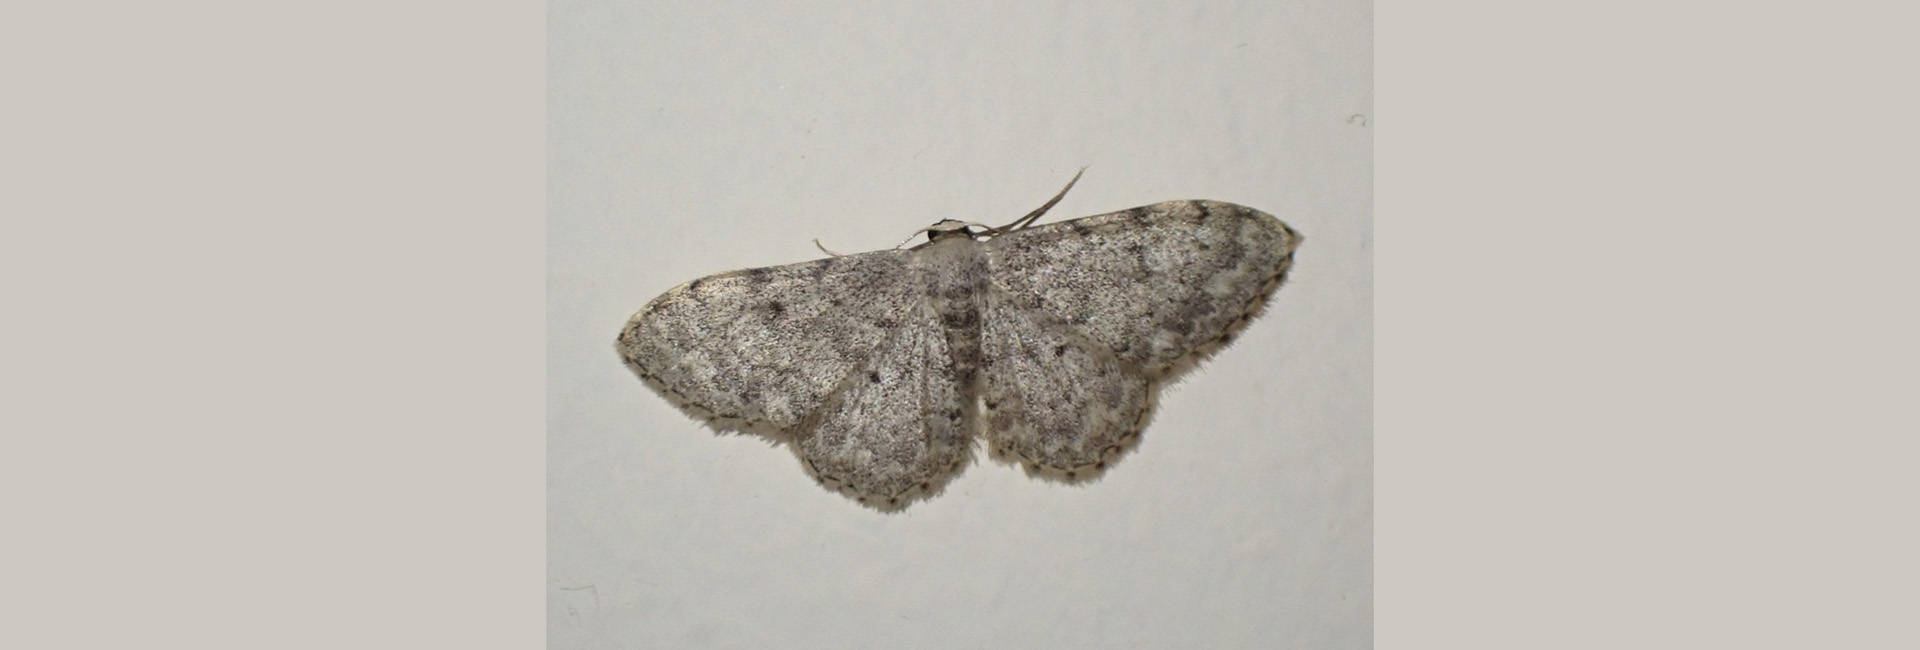 Gerinia honoraria, Crete - photo © https://www.inaturalist.org/observations/164689656